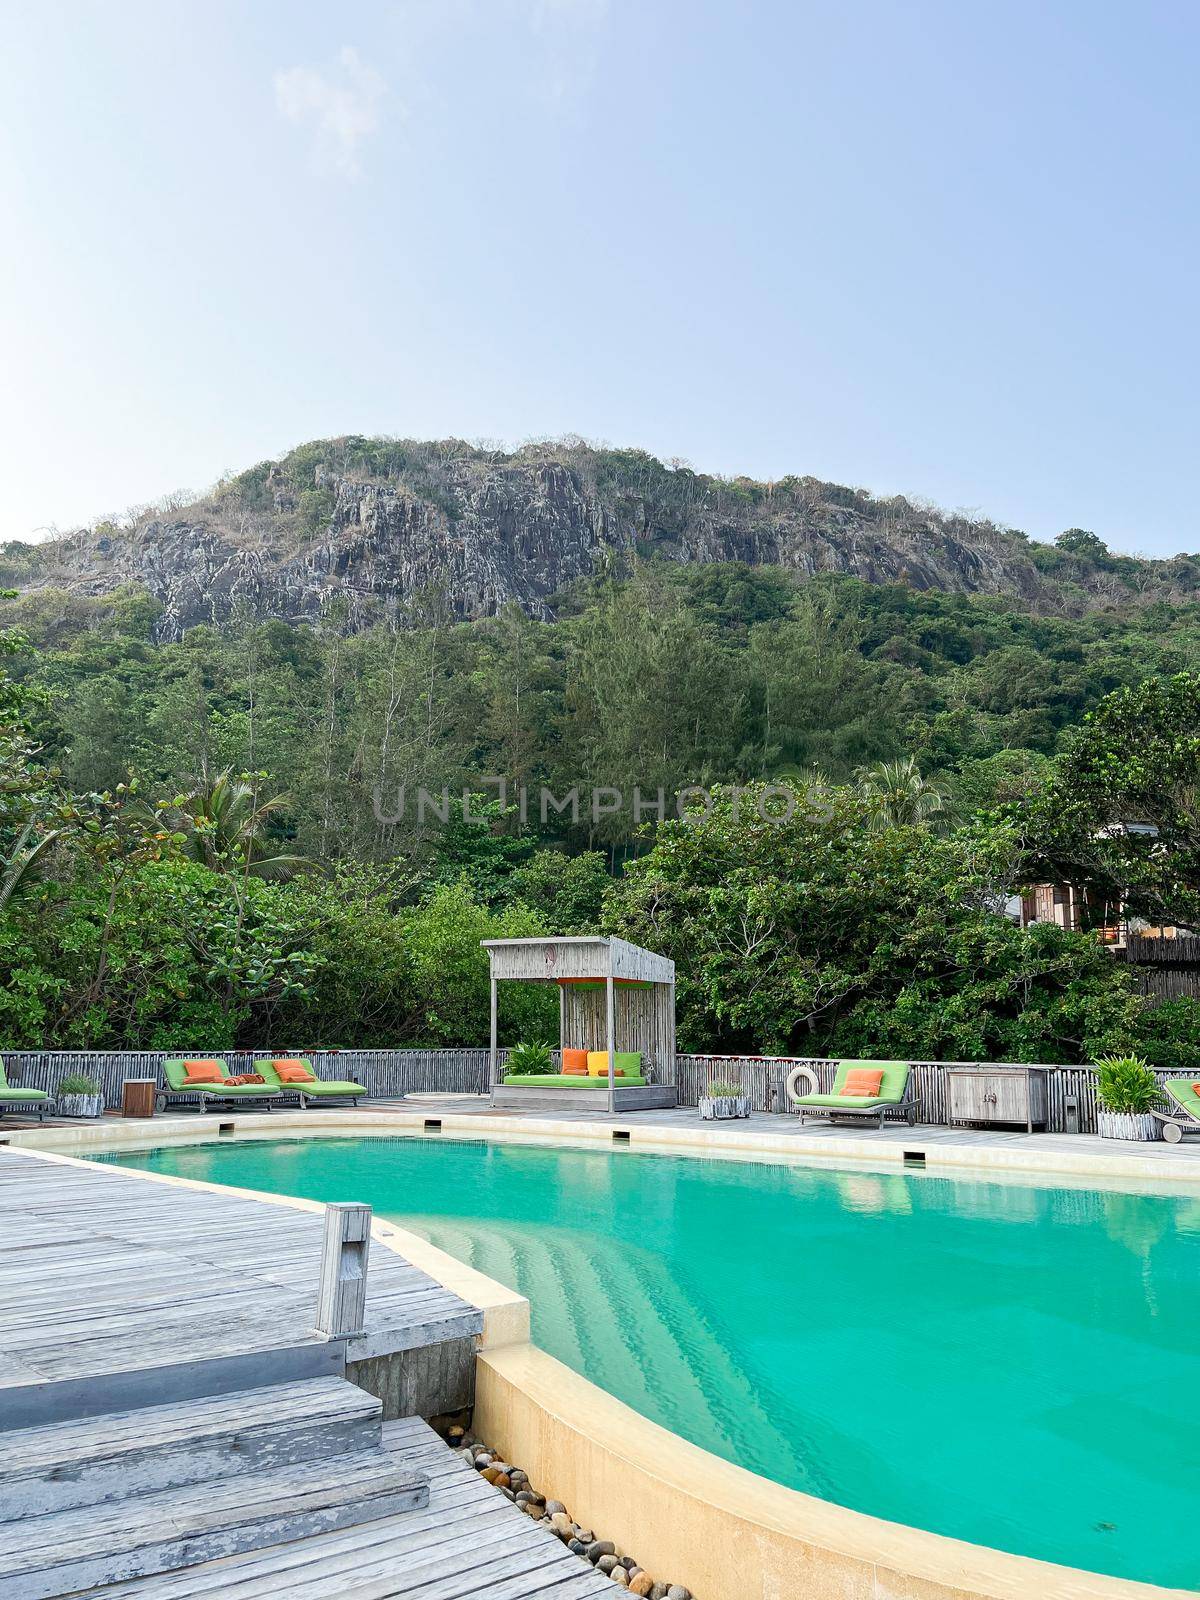 Swimming pool on roof top with beautiful mountain view. by makidotvn